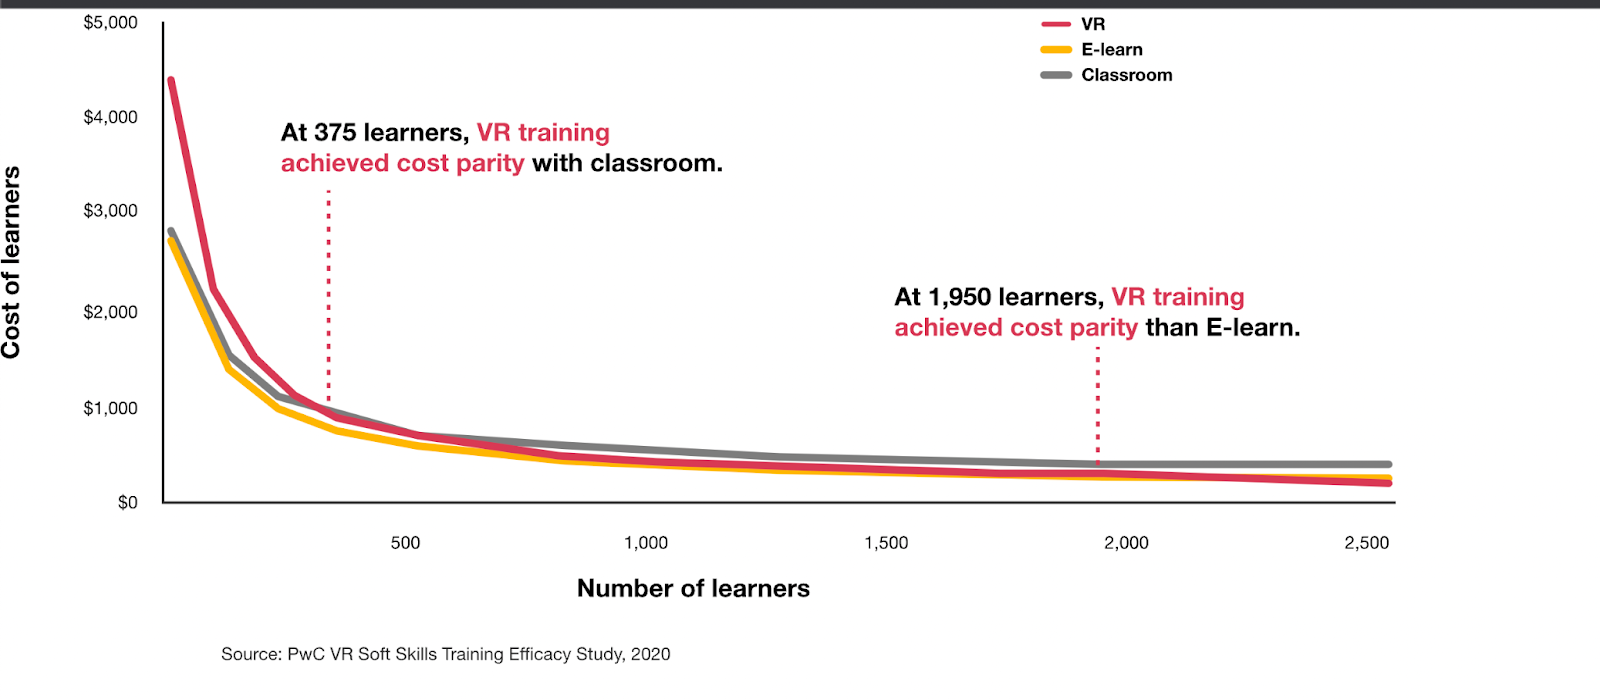 VR training costs less when released at a larger scale